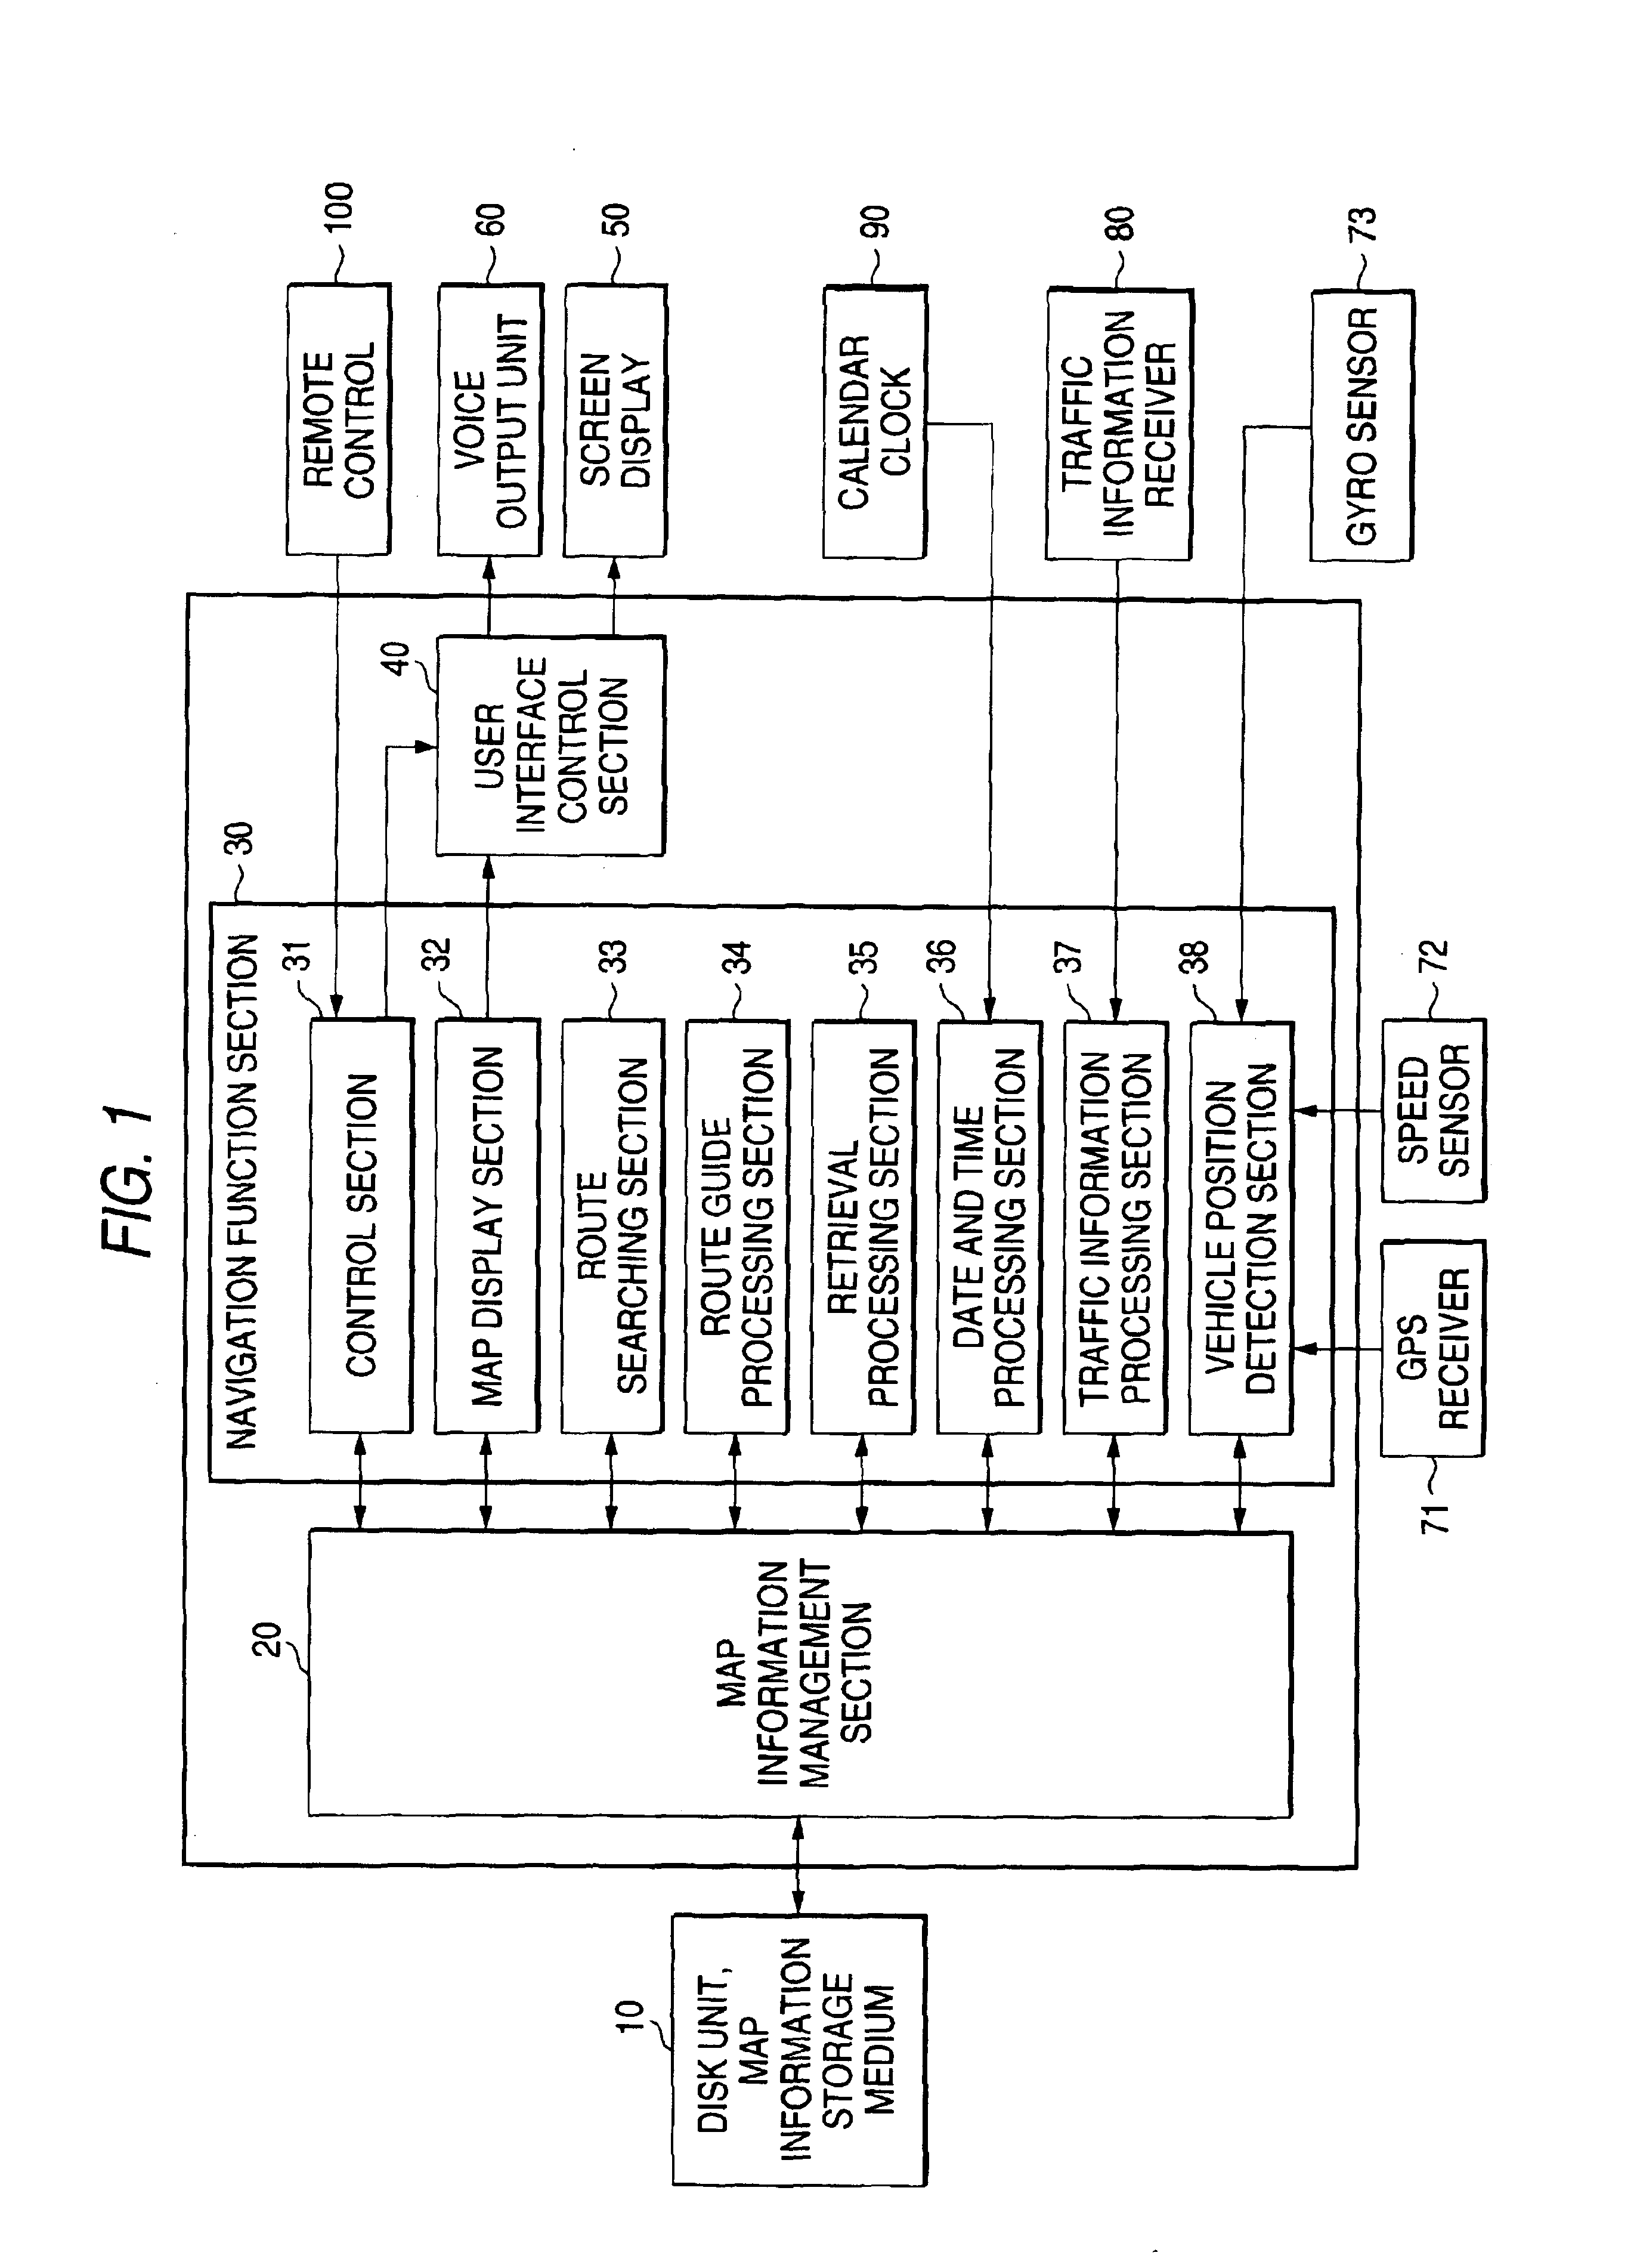 Navigation system, route searching method, and map information guide method